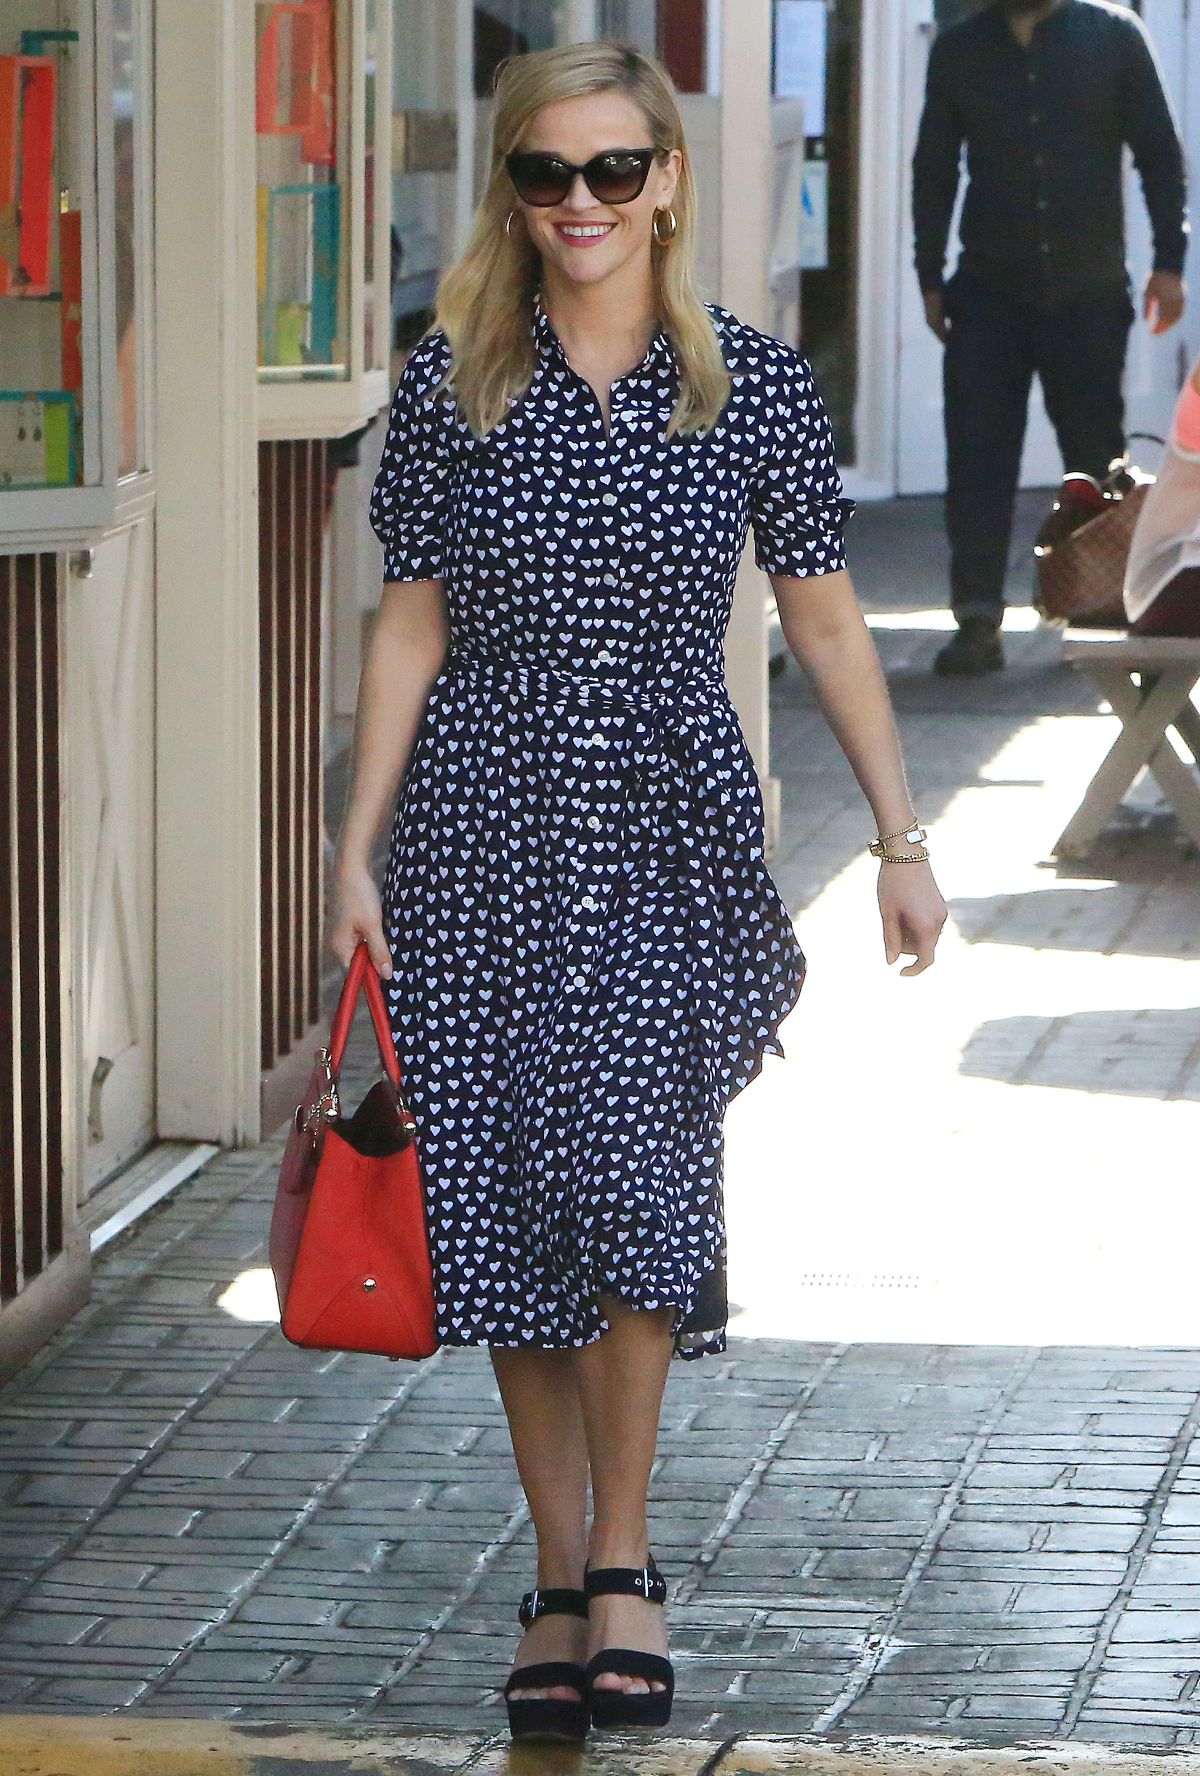 REESE WITHERSPOON Out in Los Angeles 02/09/2018 – HawtCelebs